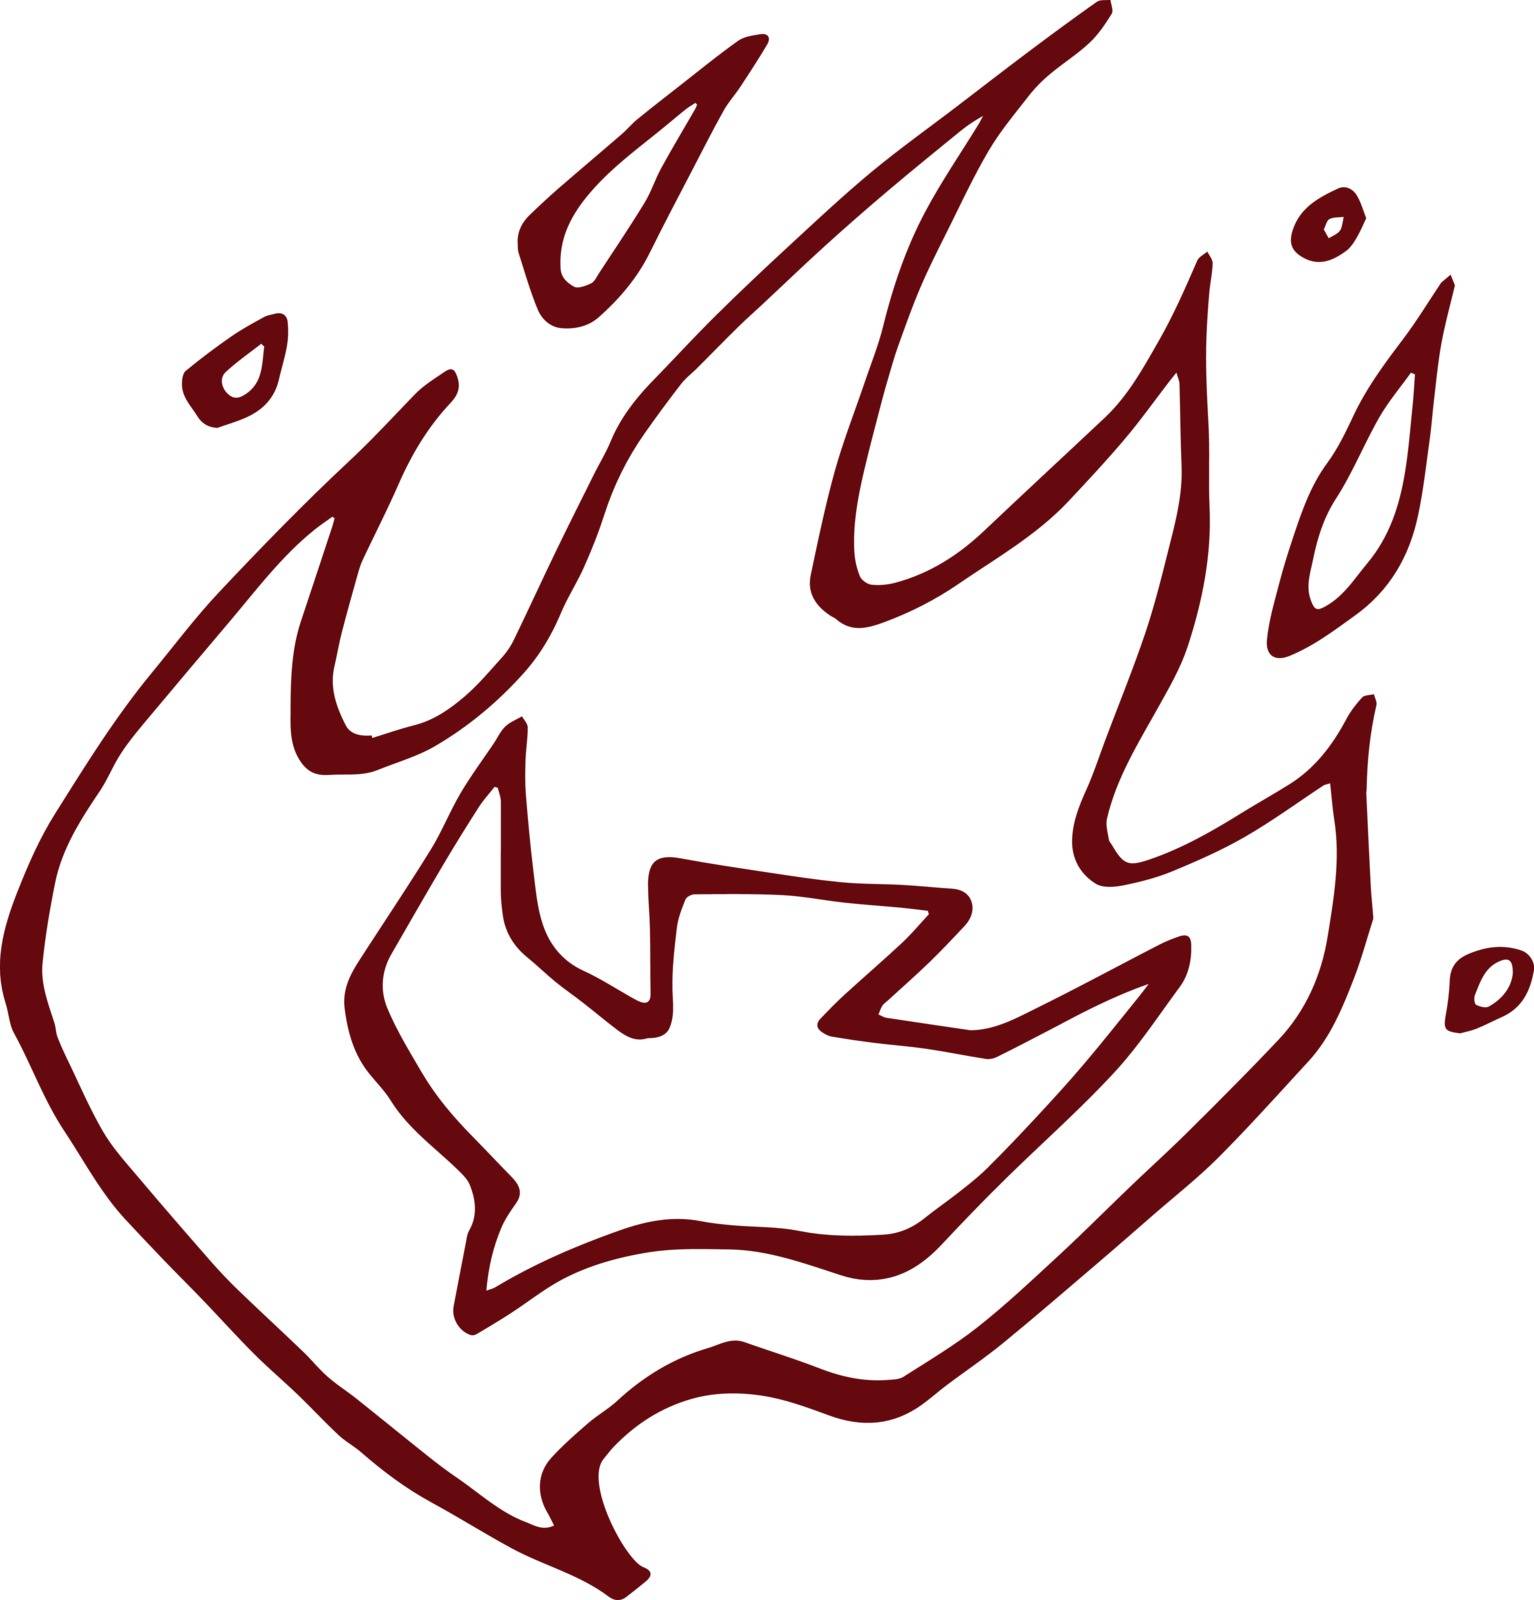 Vector illustration or drawing of a dove bird on fire representing the Holy Spirit